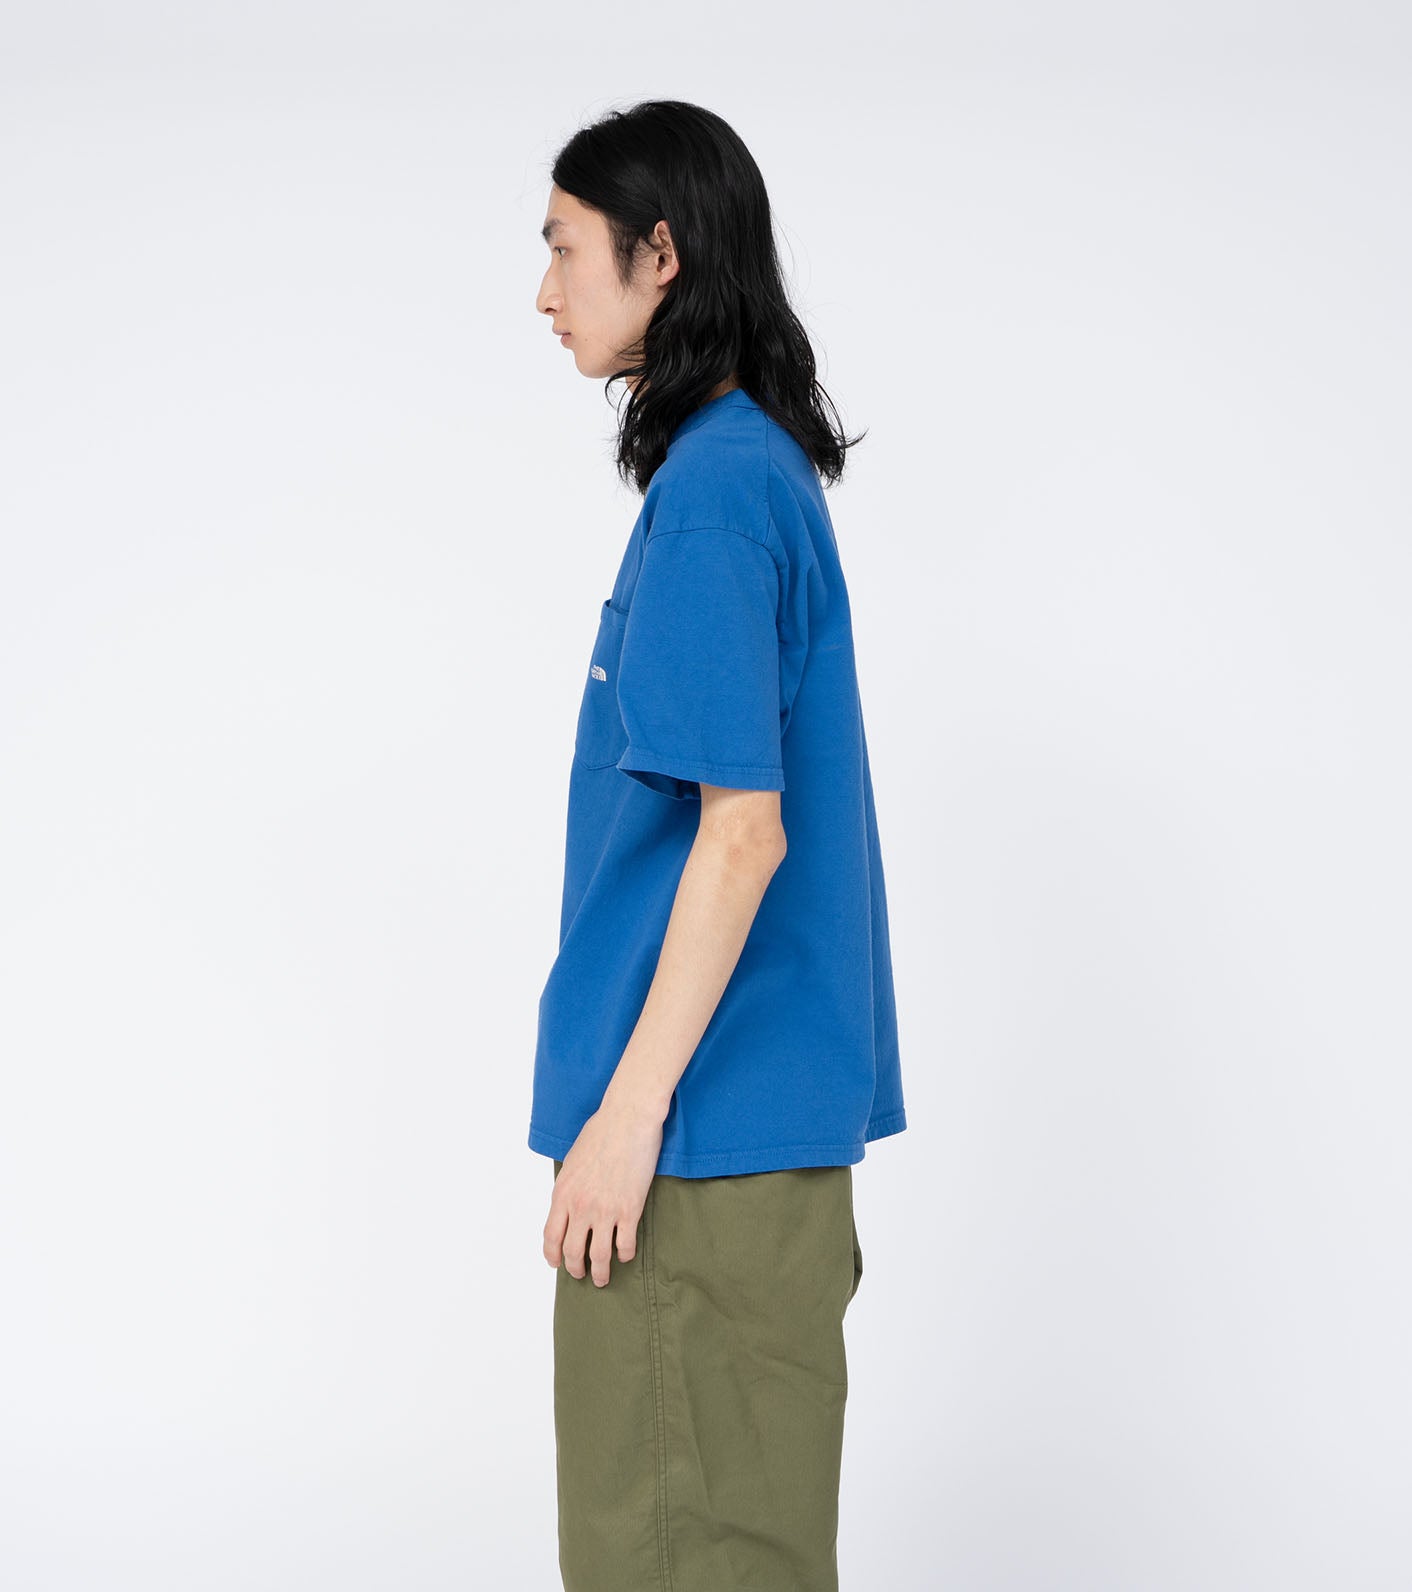 THE NORTH FACE PURPLE LABEL 7oz Pocket Tee